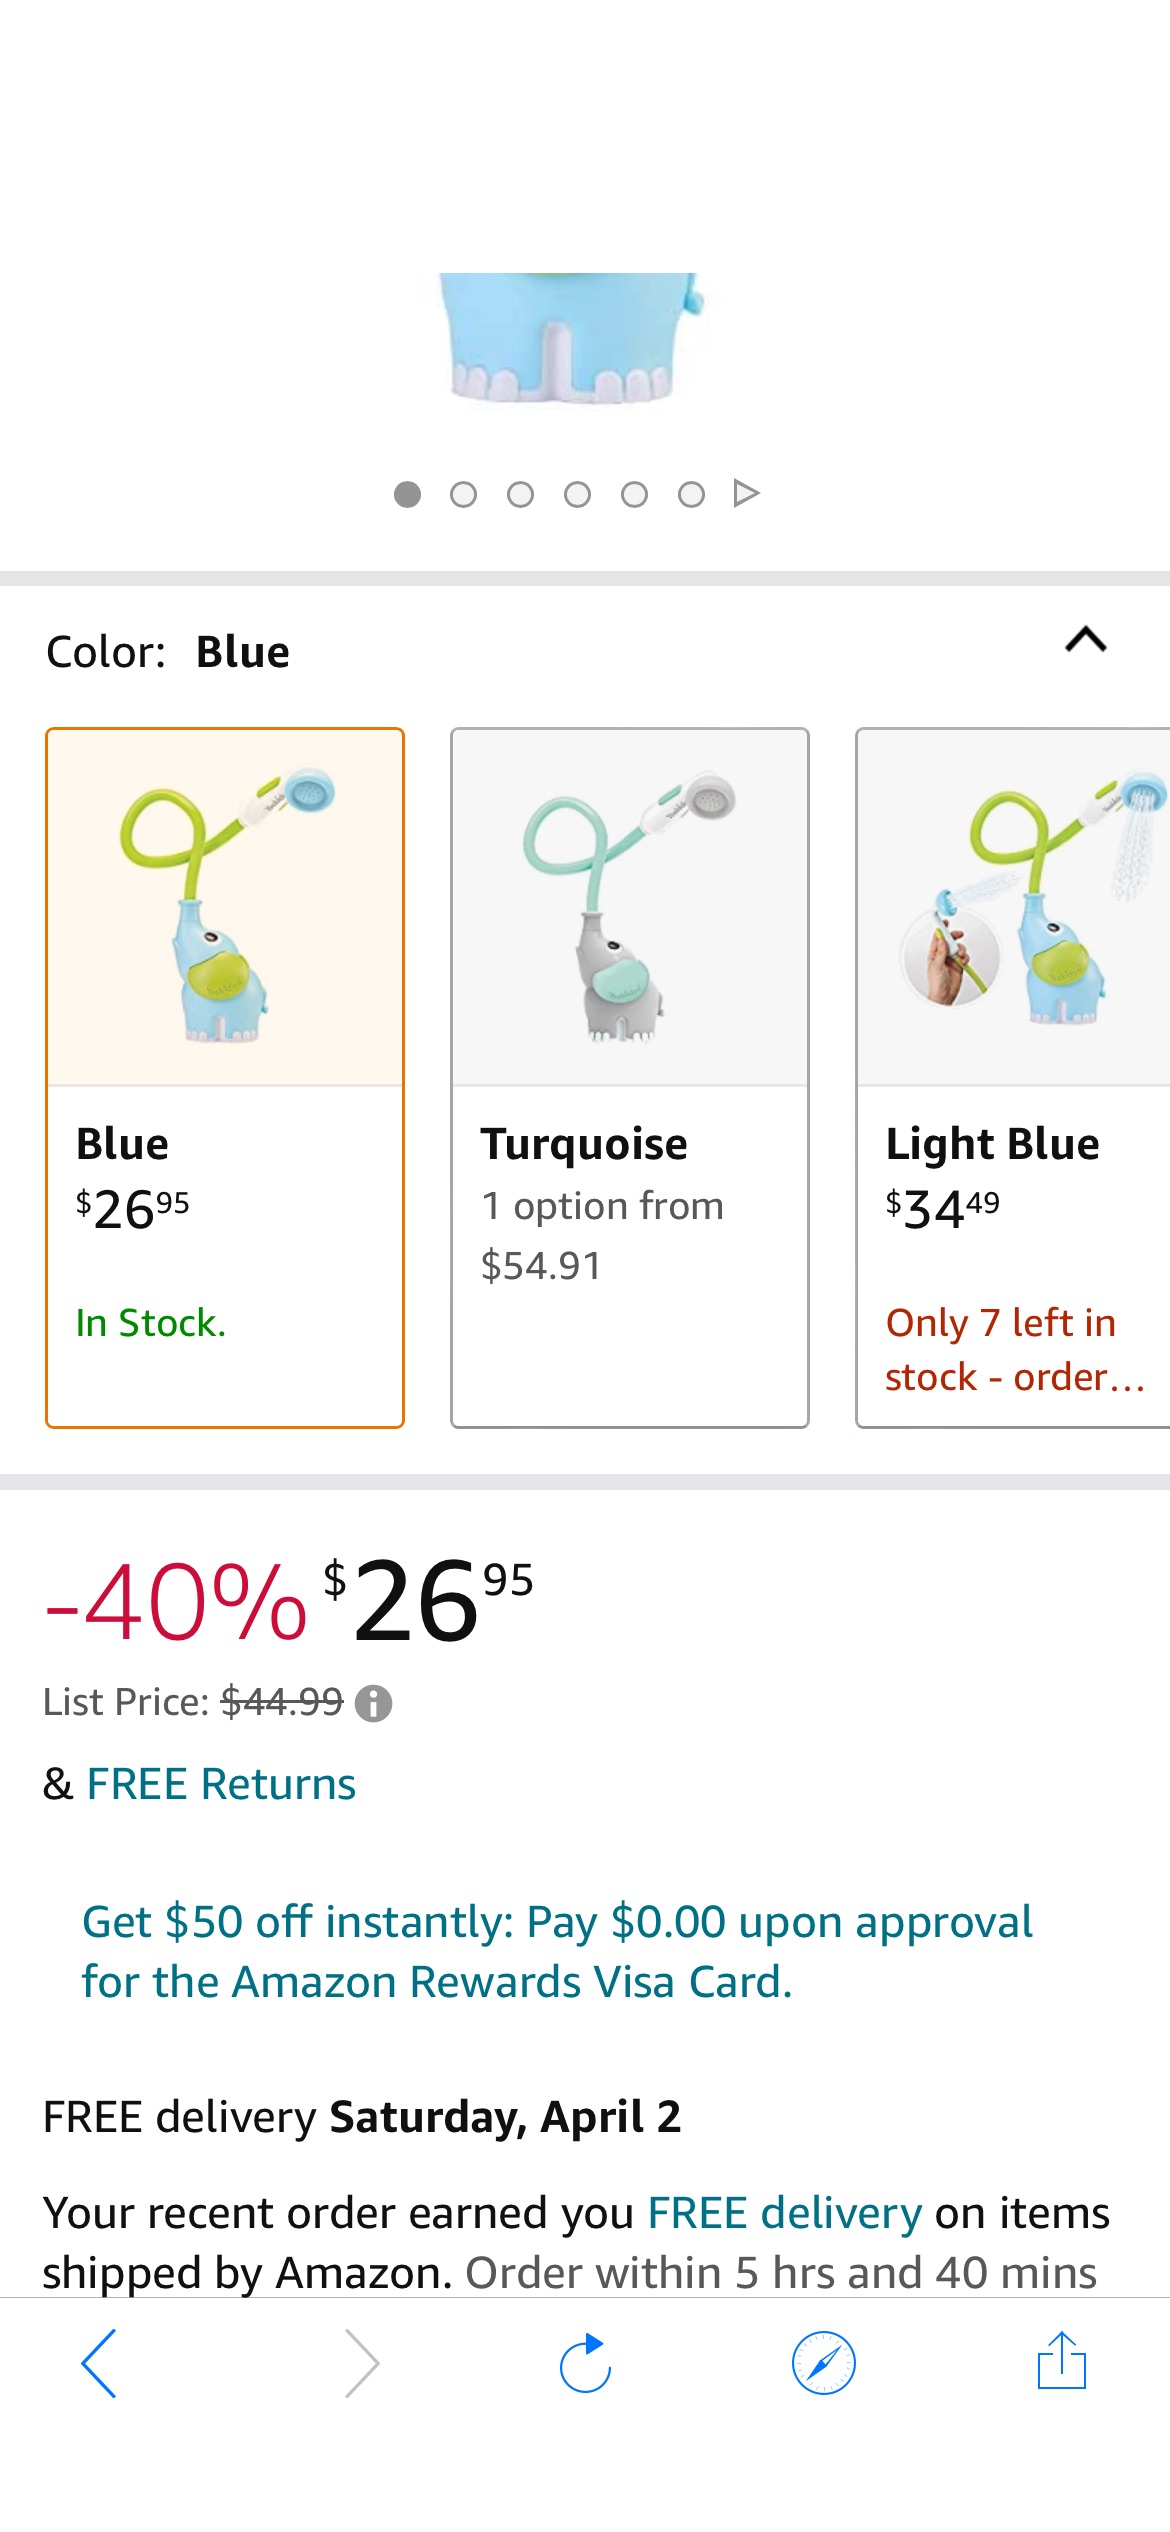 Amazon.com: Yookidoo Baby Bath Shower Head - Elephant Water Pump and Trunk Spout Rinser - for Newborn Babies in Tub Or Sink (Blue) : Baby宝宝淋浴花洒